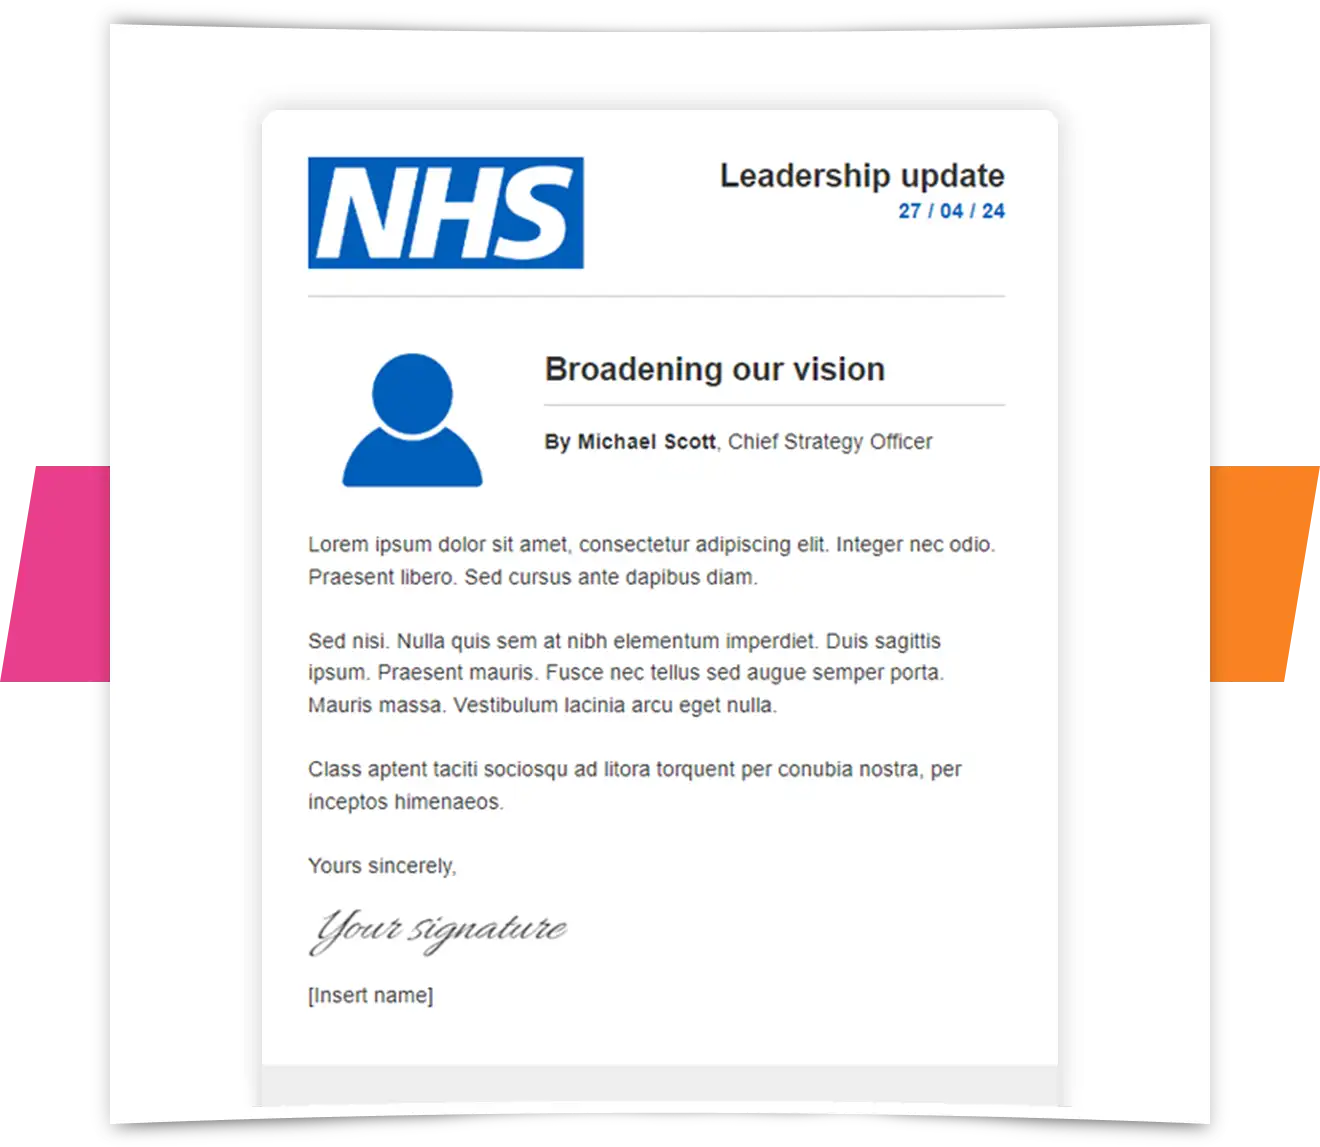 NHS Internal comms email example